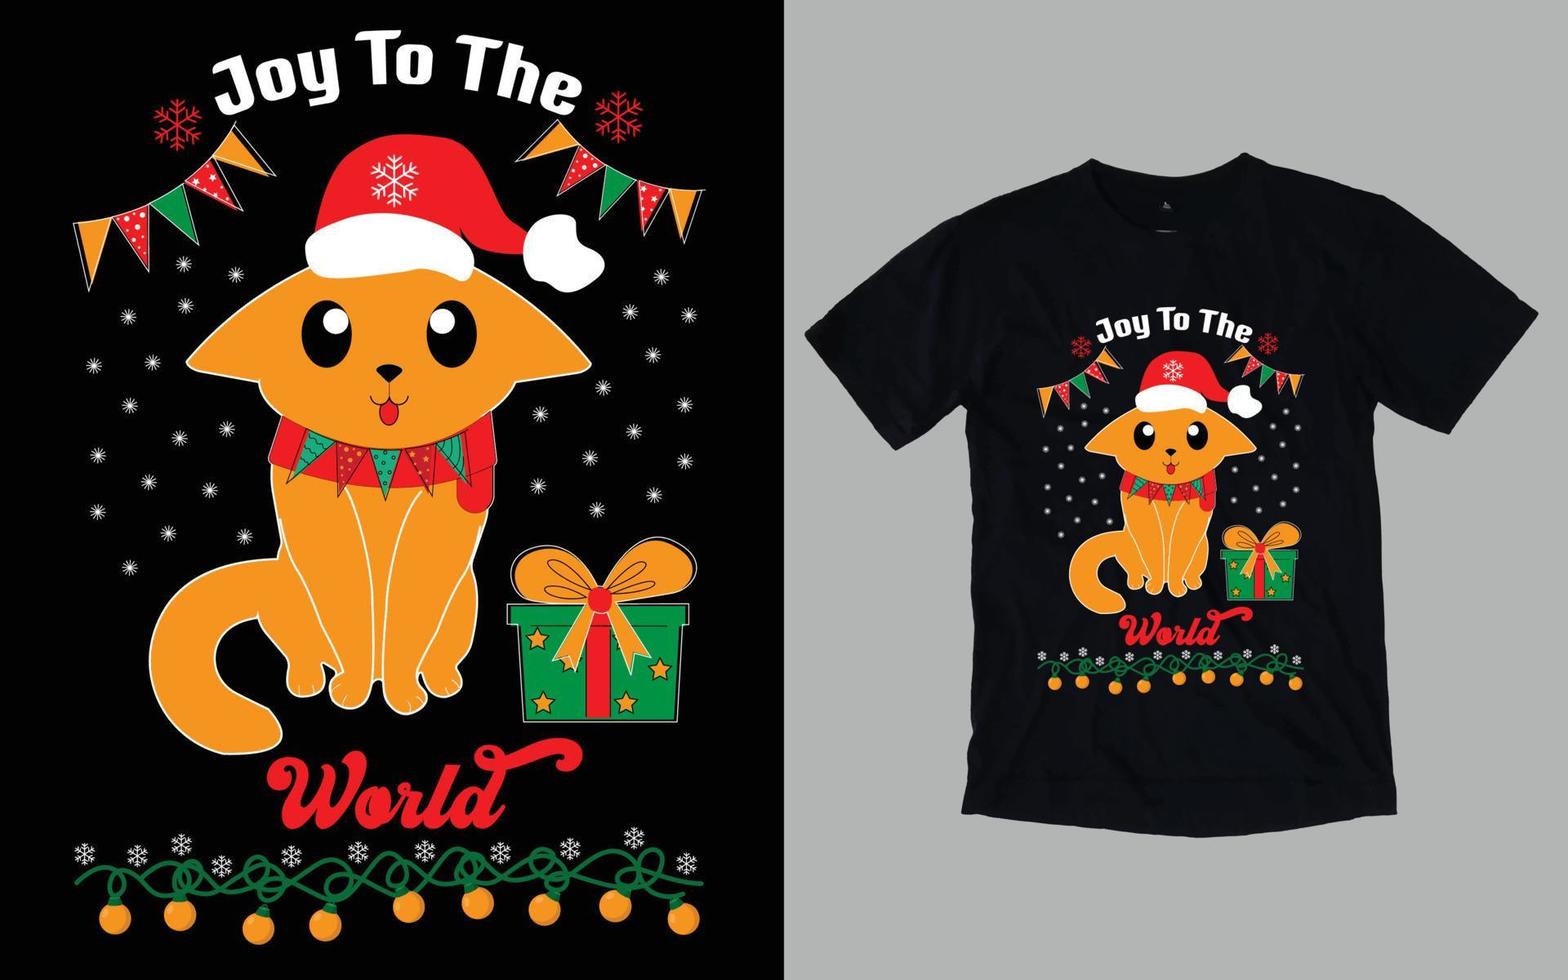 Christmas Day Typography and Graphic T-shirt Design vector